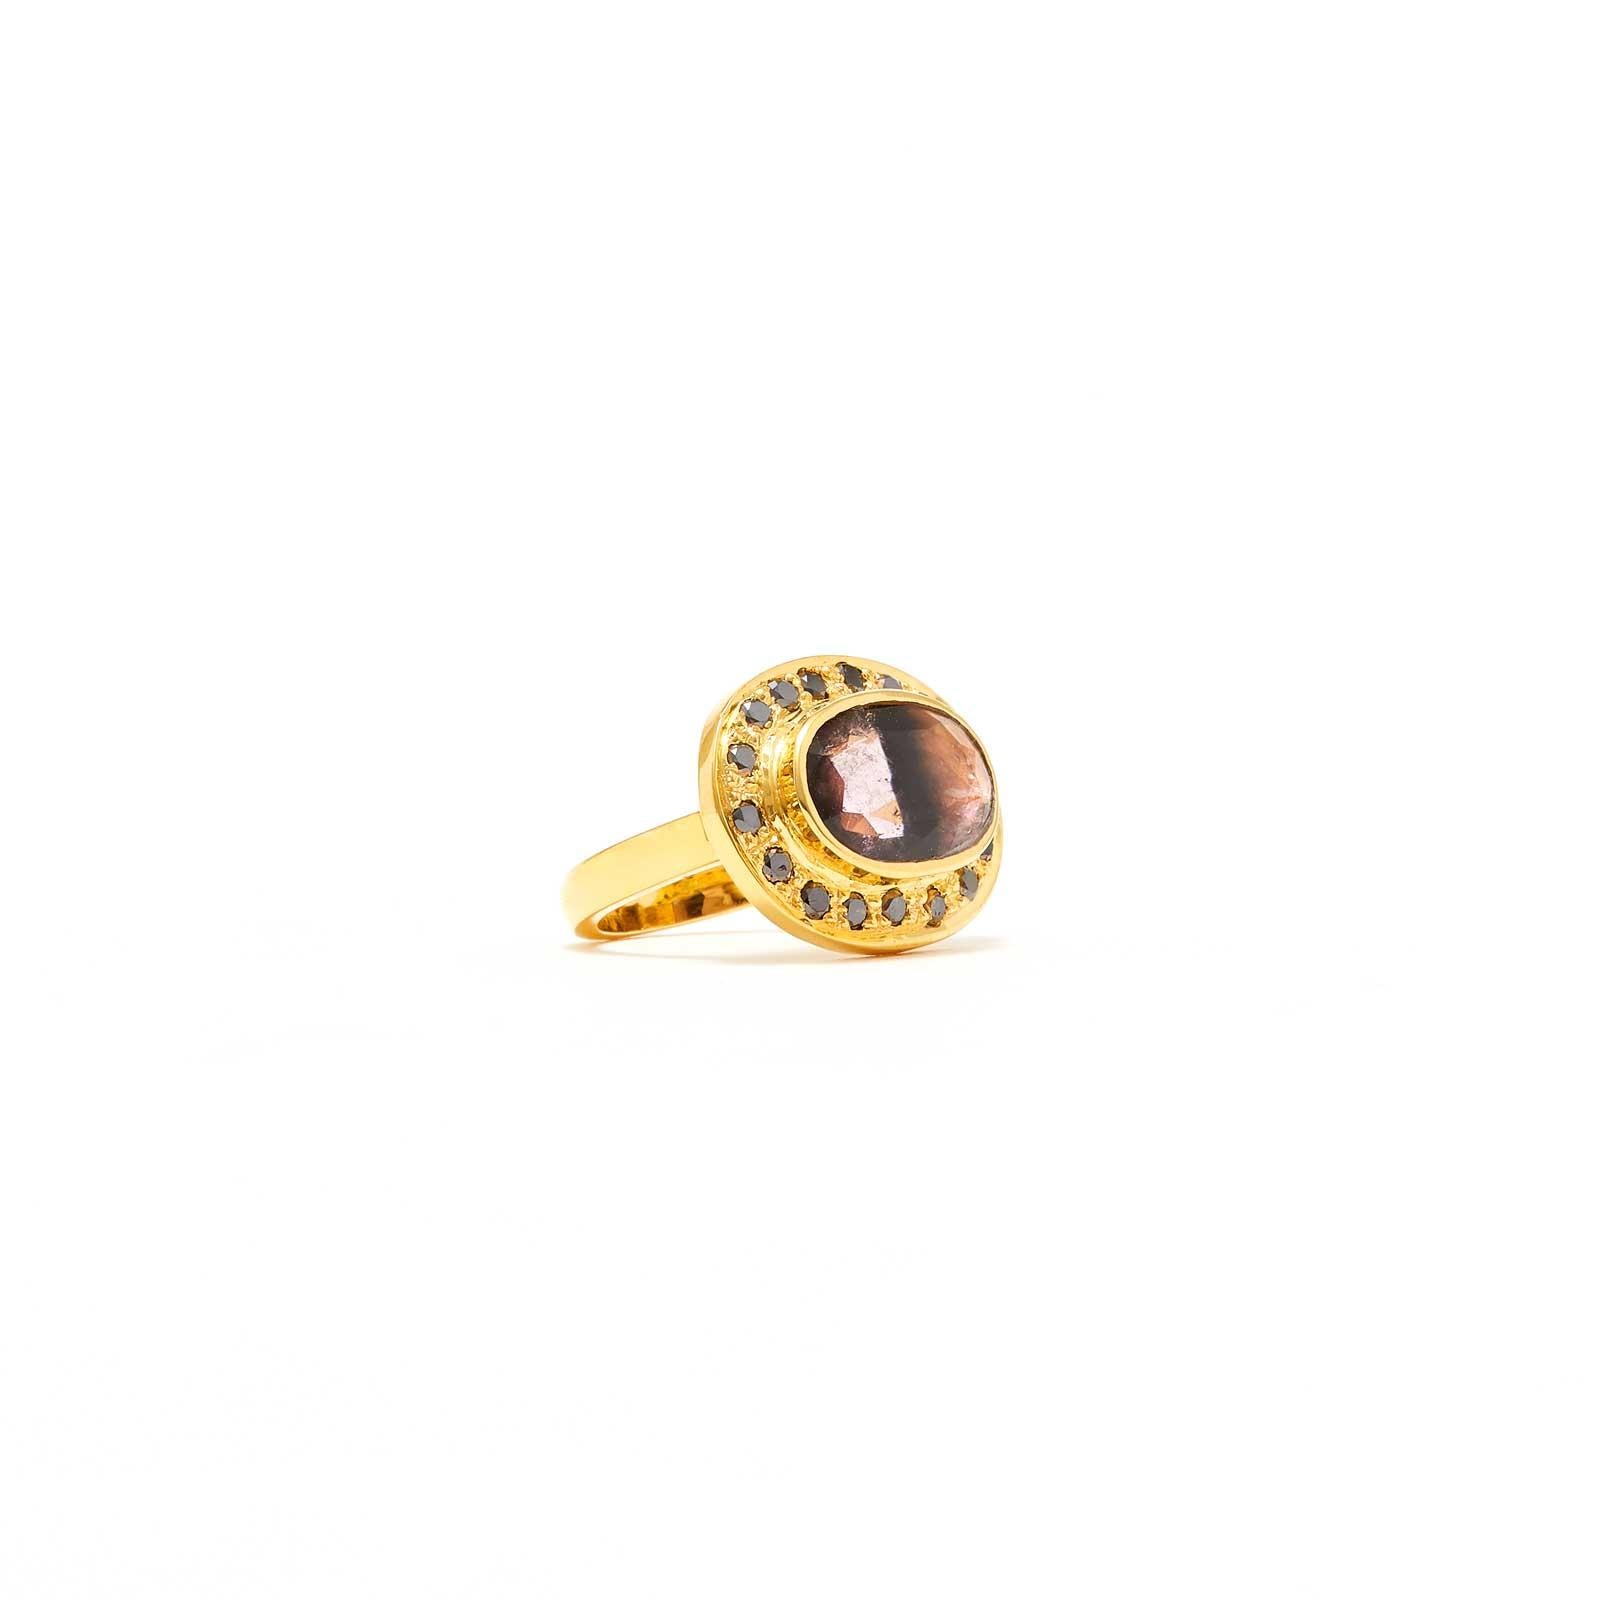 A beautiful Mauve hued Black Stripe Tourmaline accented with Black Diamonds in a Gold oval setting. An exceptional dress ring of classic design reimagined with a modern twist.

- Natural Mauve hued Black Stripe Tourmaline weight approx 2.20